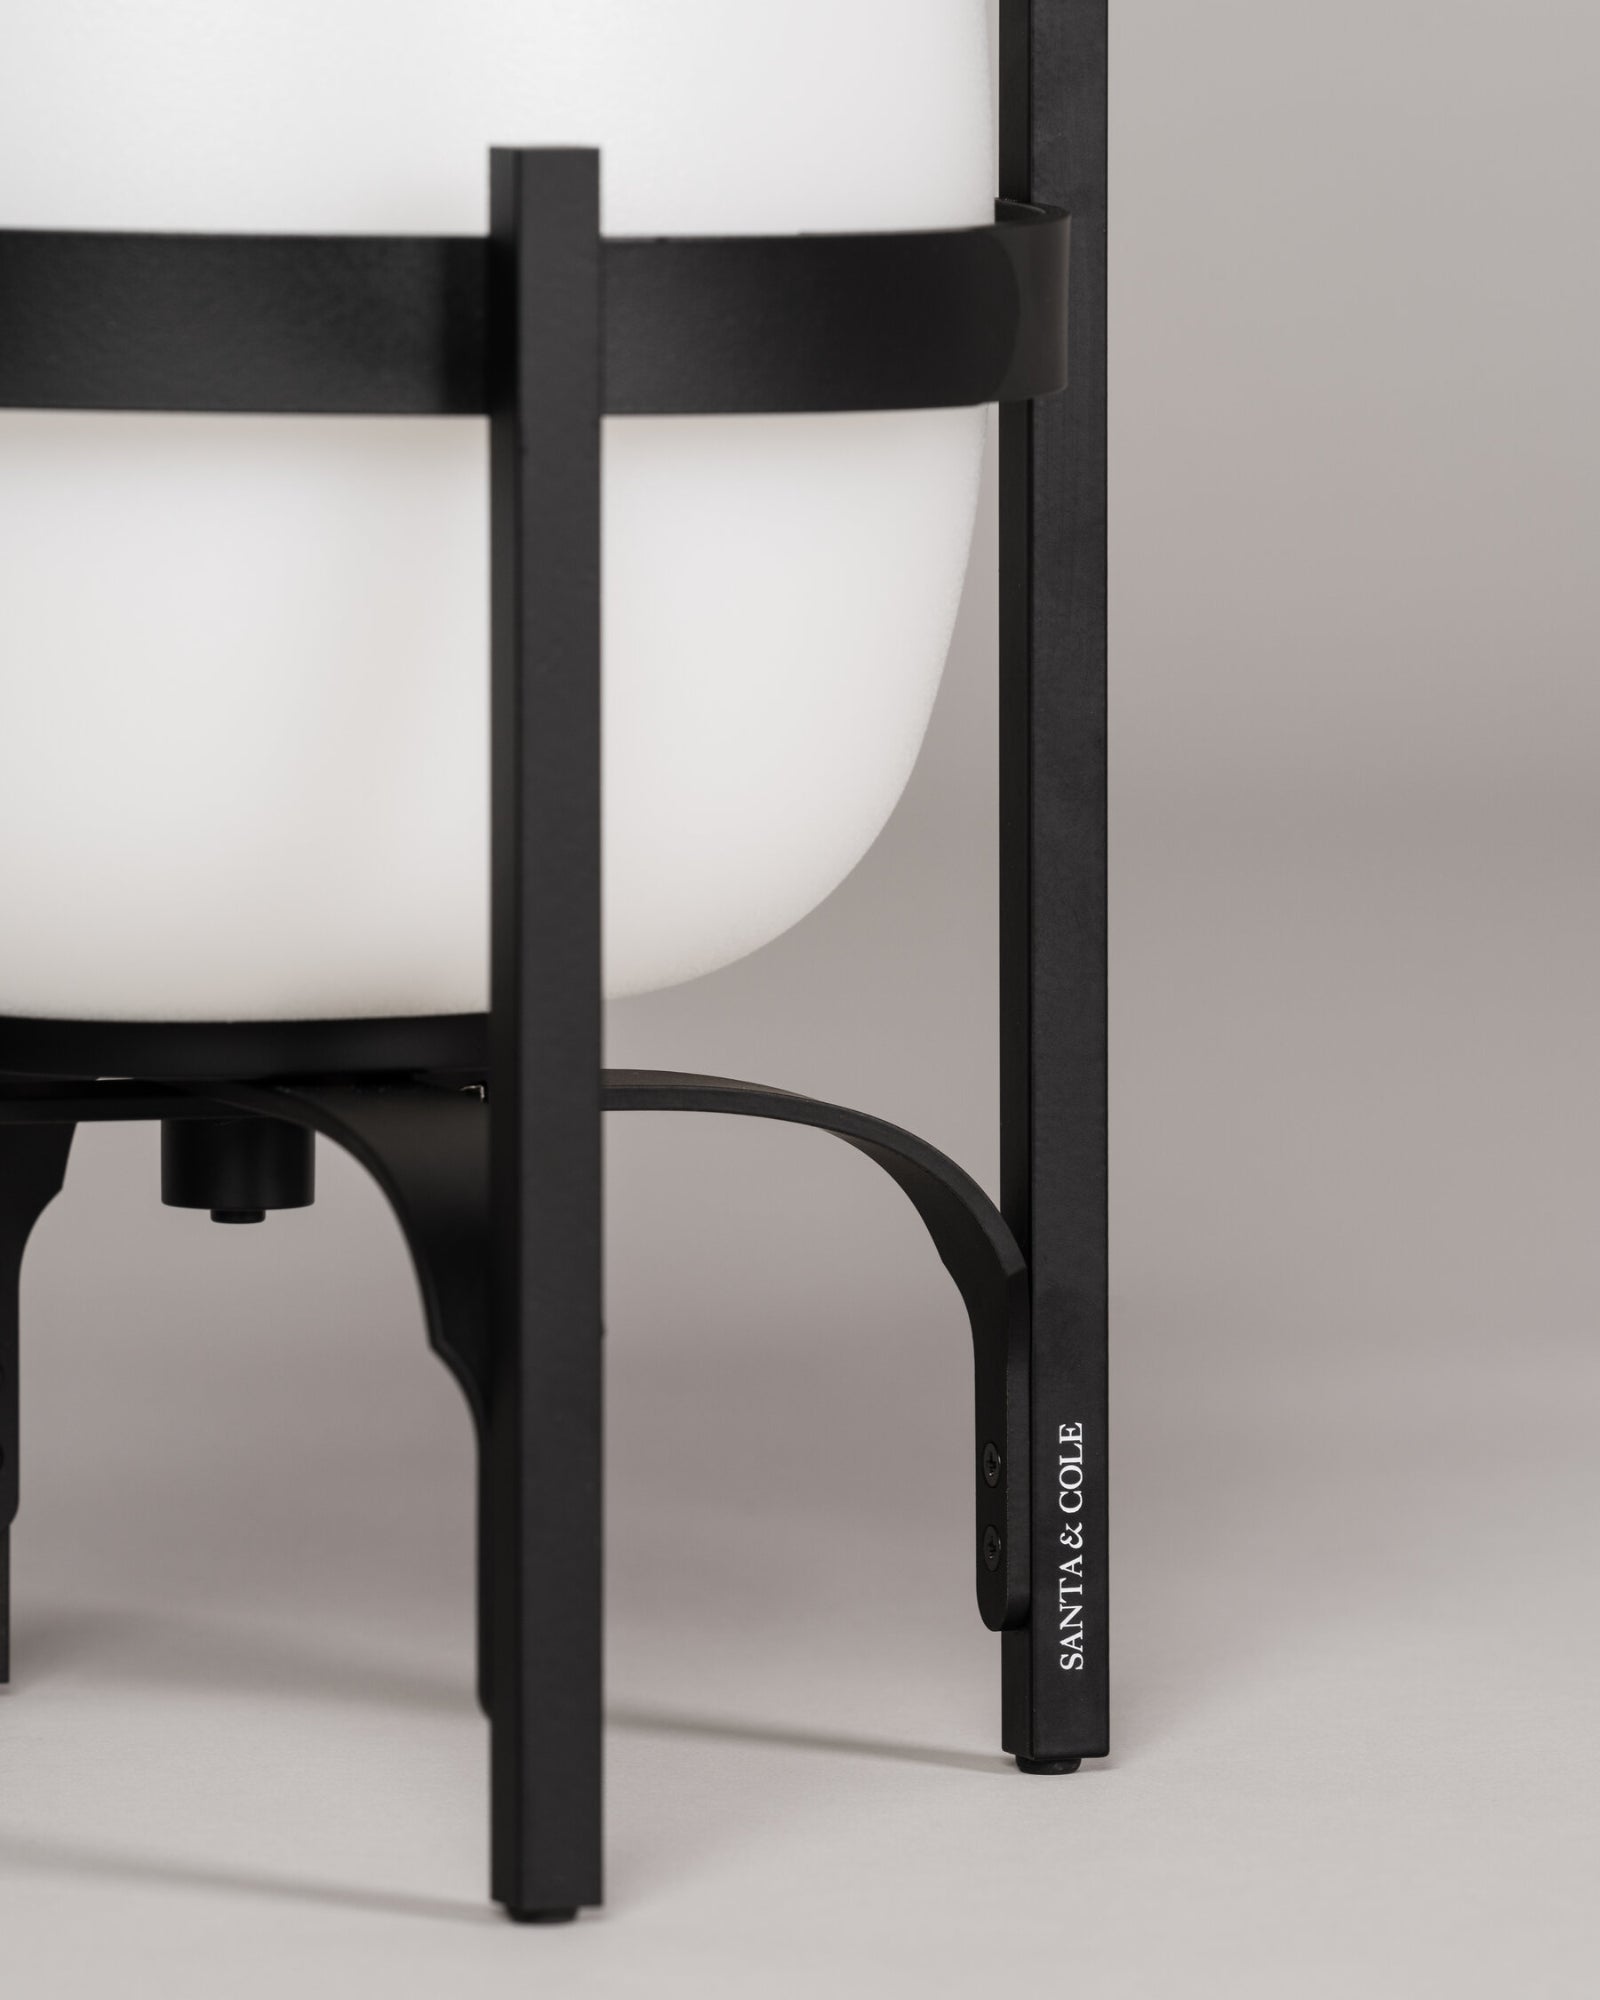 Contemporary table lamp called the Cestita Table Lamp in black finish by Santa & Cole featured